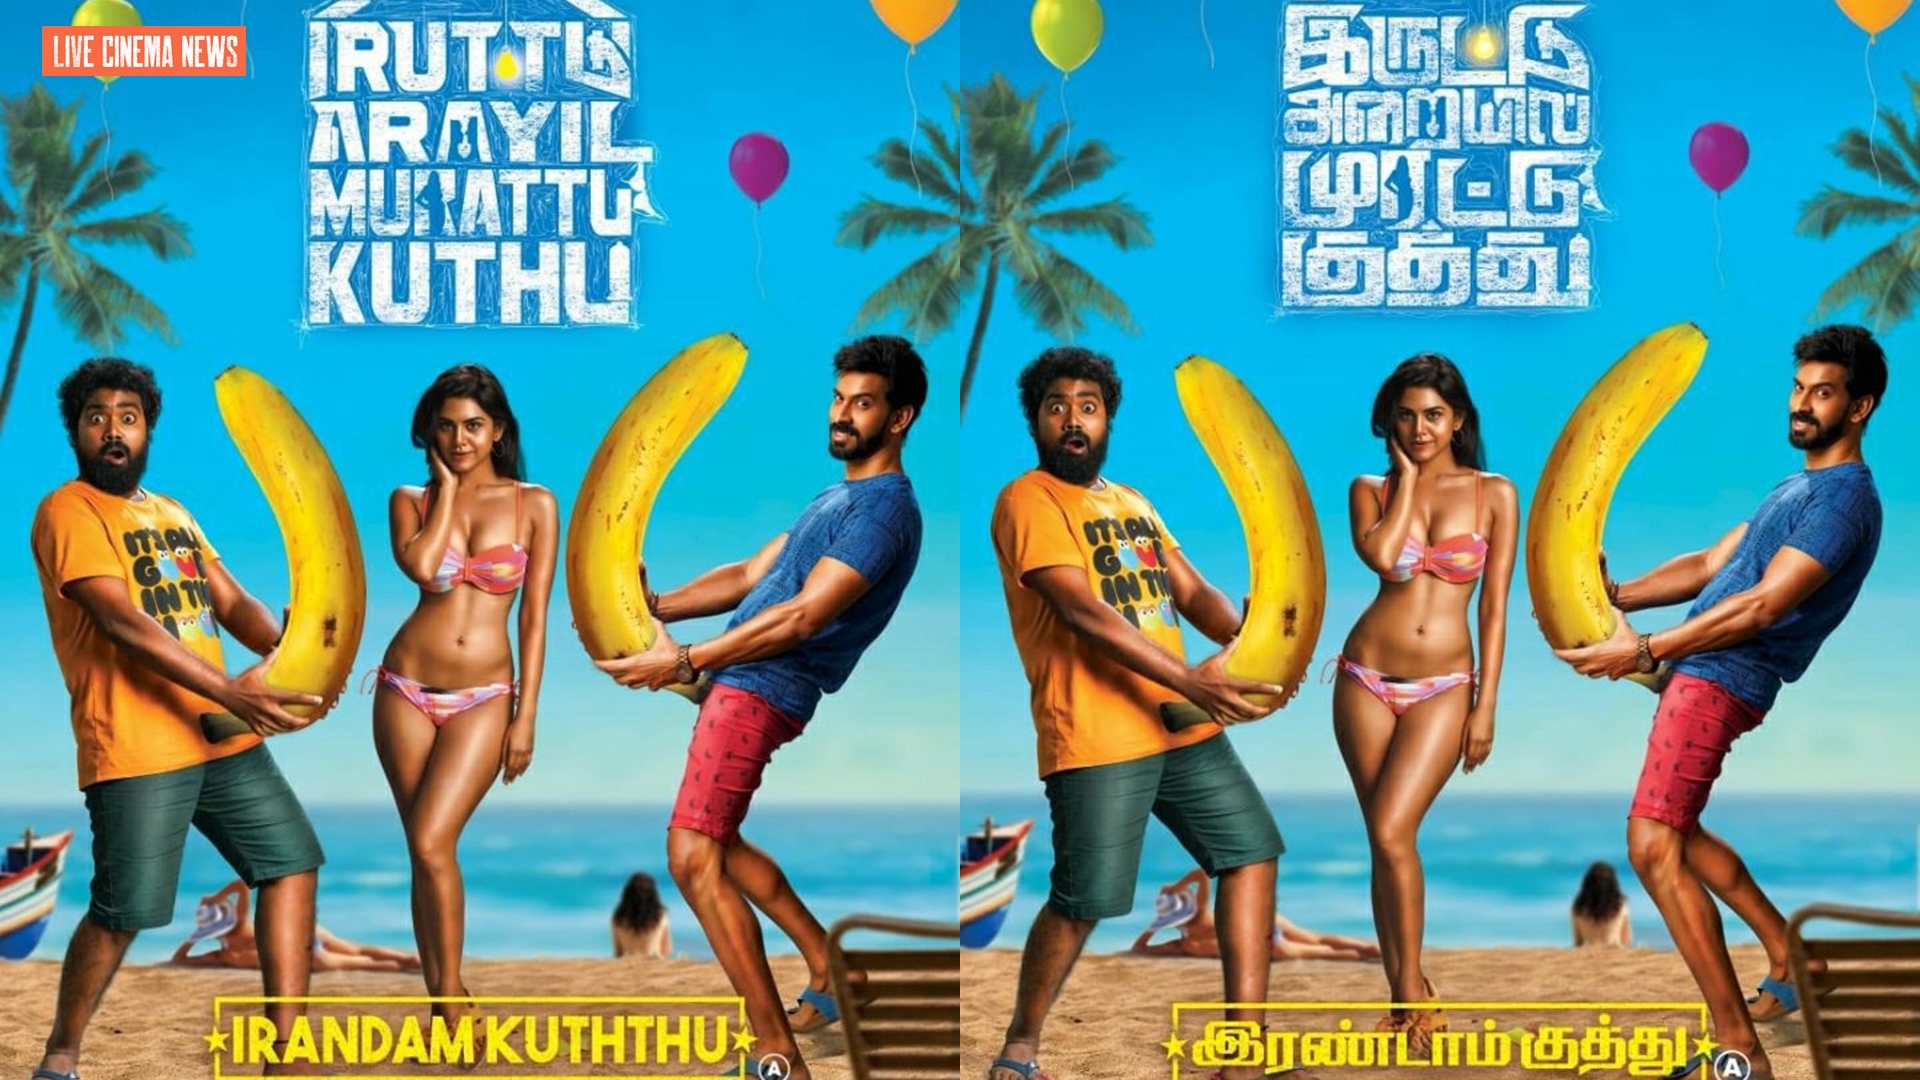 Irandam Kuthu: The sequel to Gautham Karthik‘s Adult comedy is here